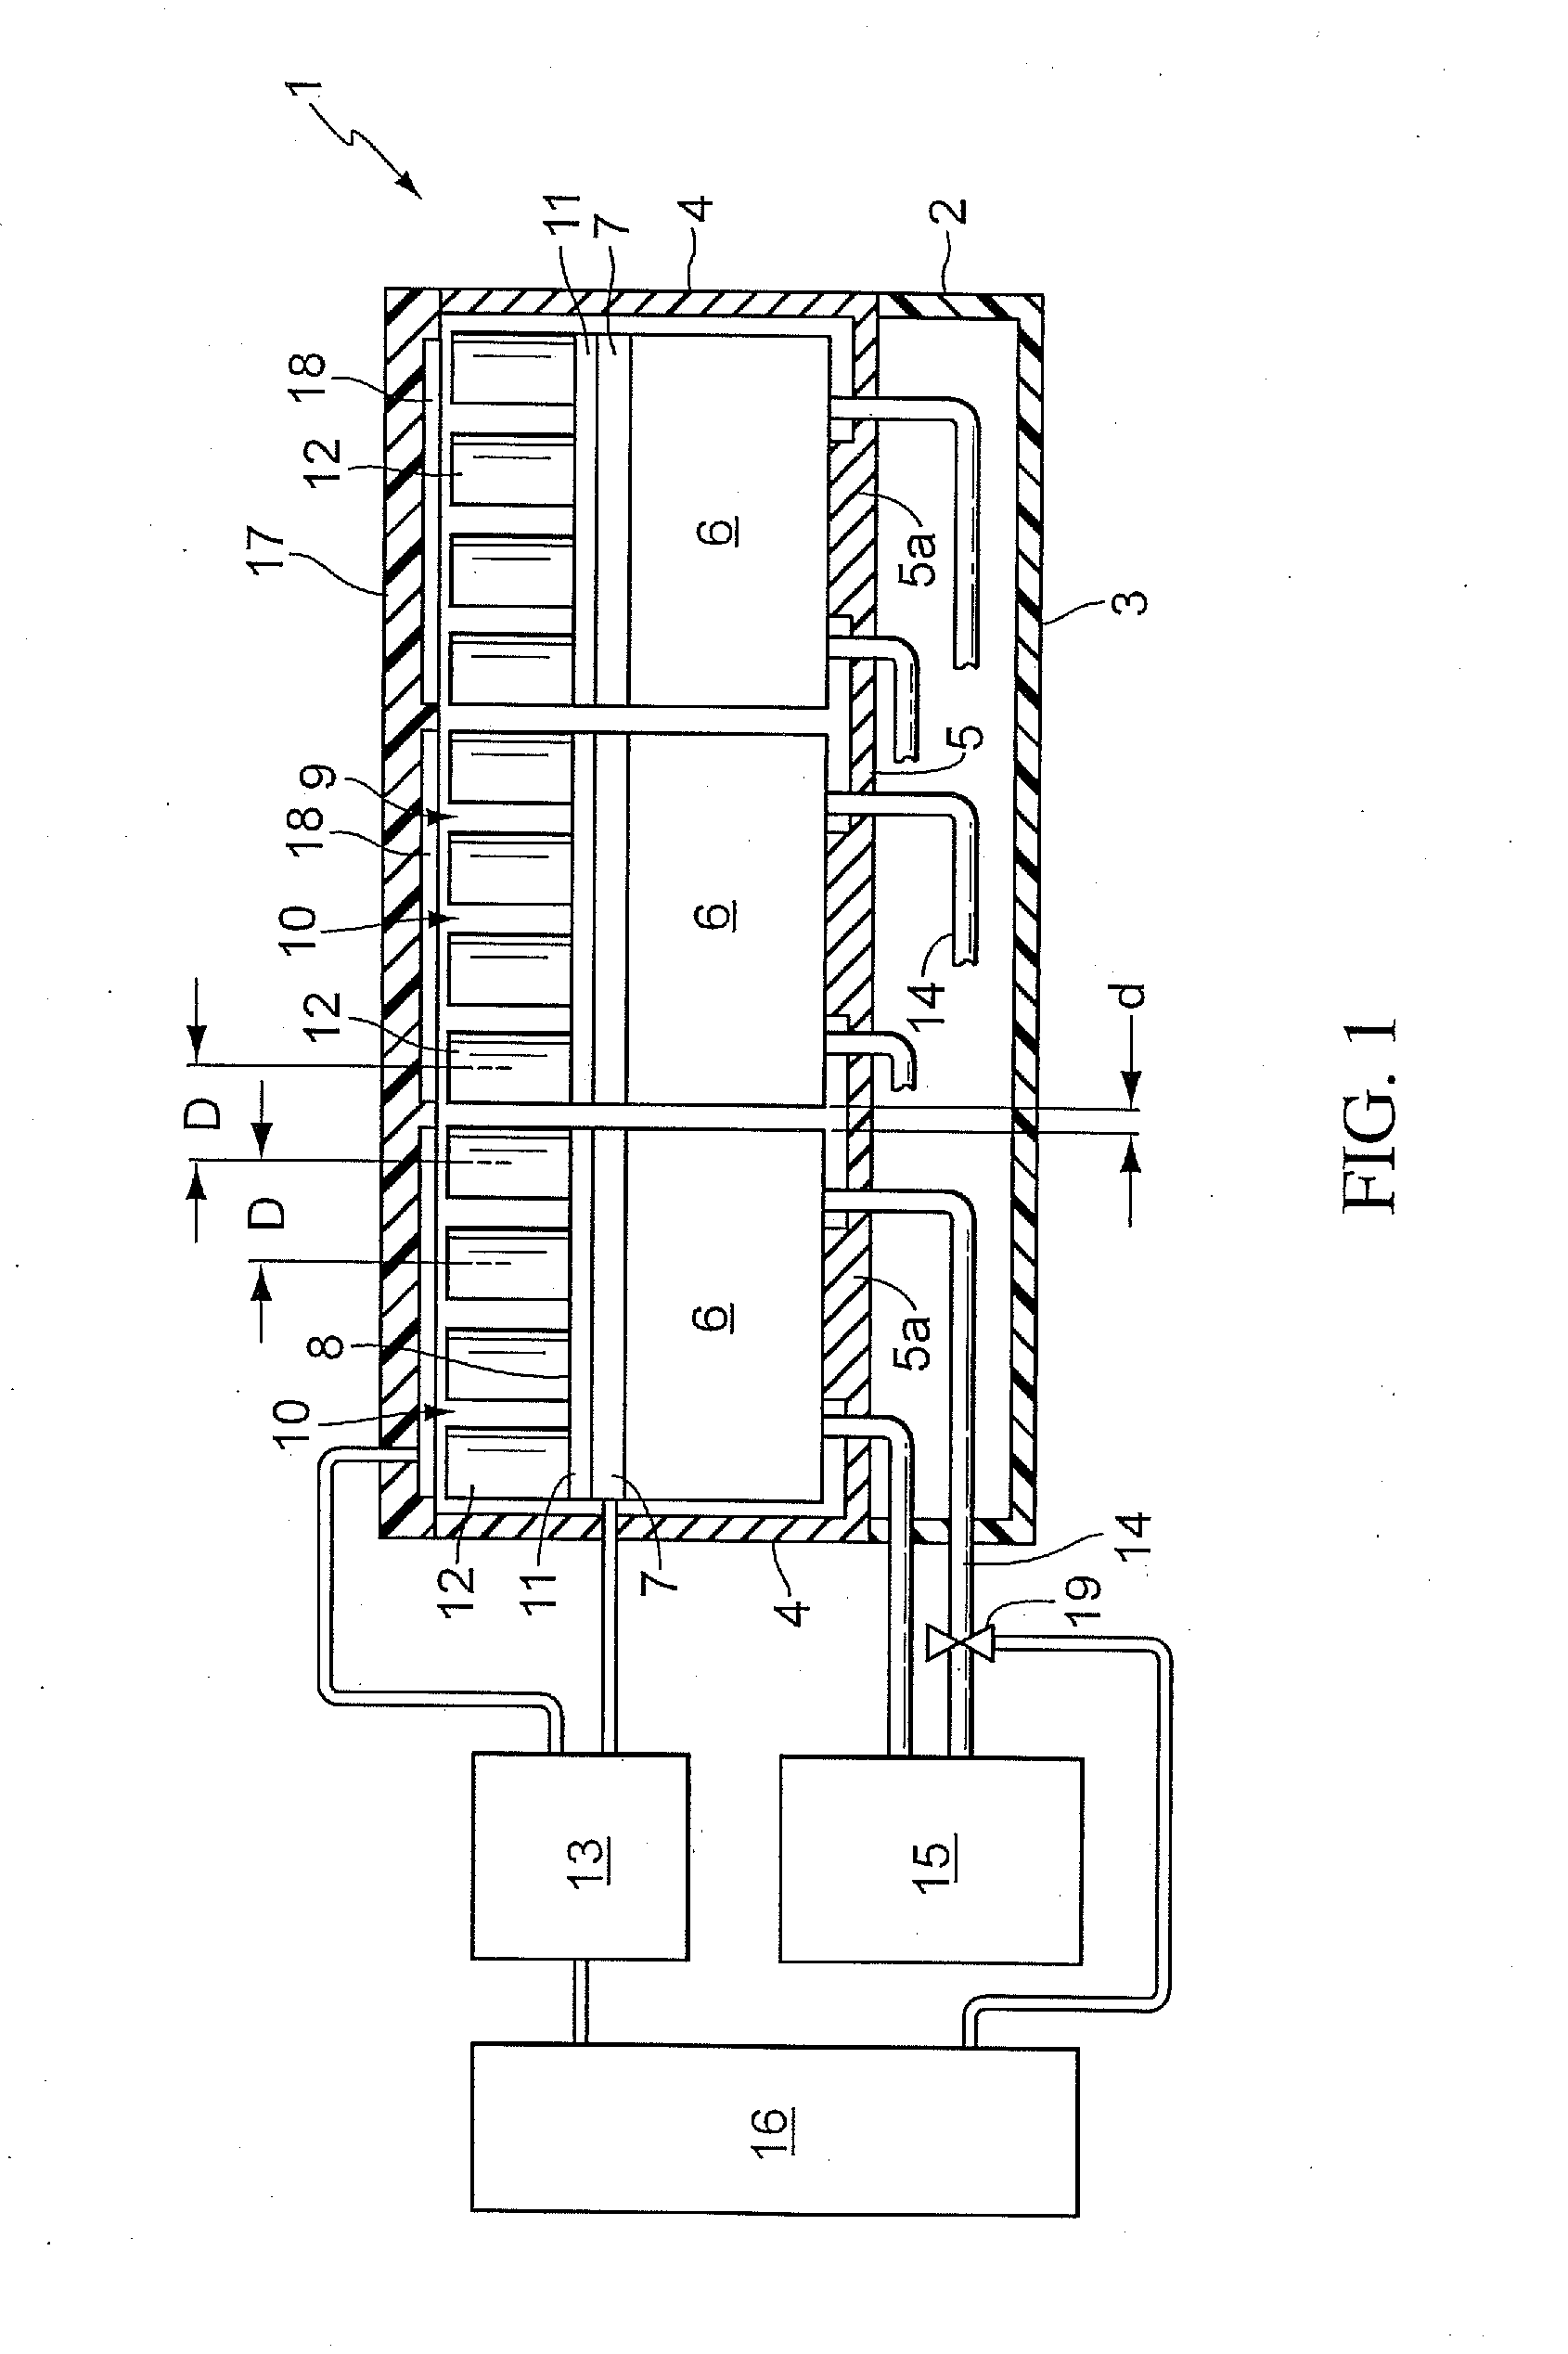 Device for carrying out chemical or biological reactions